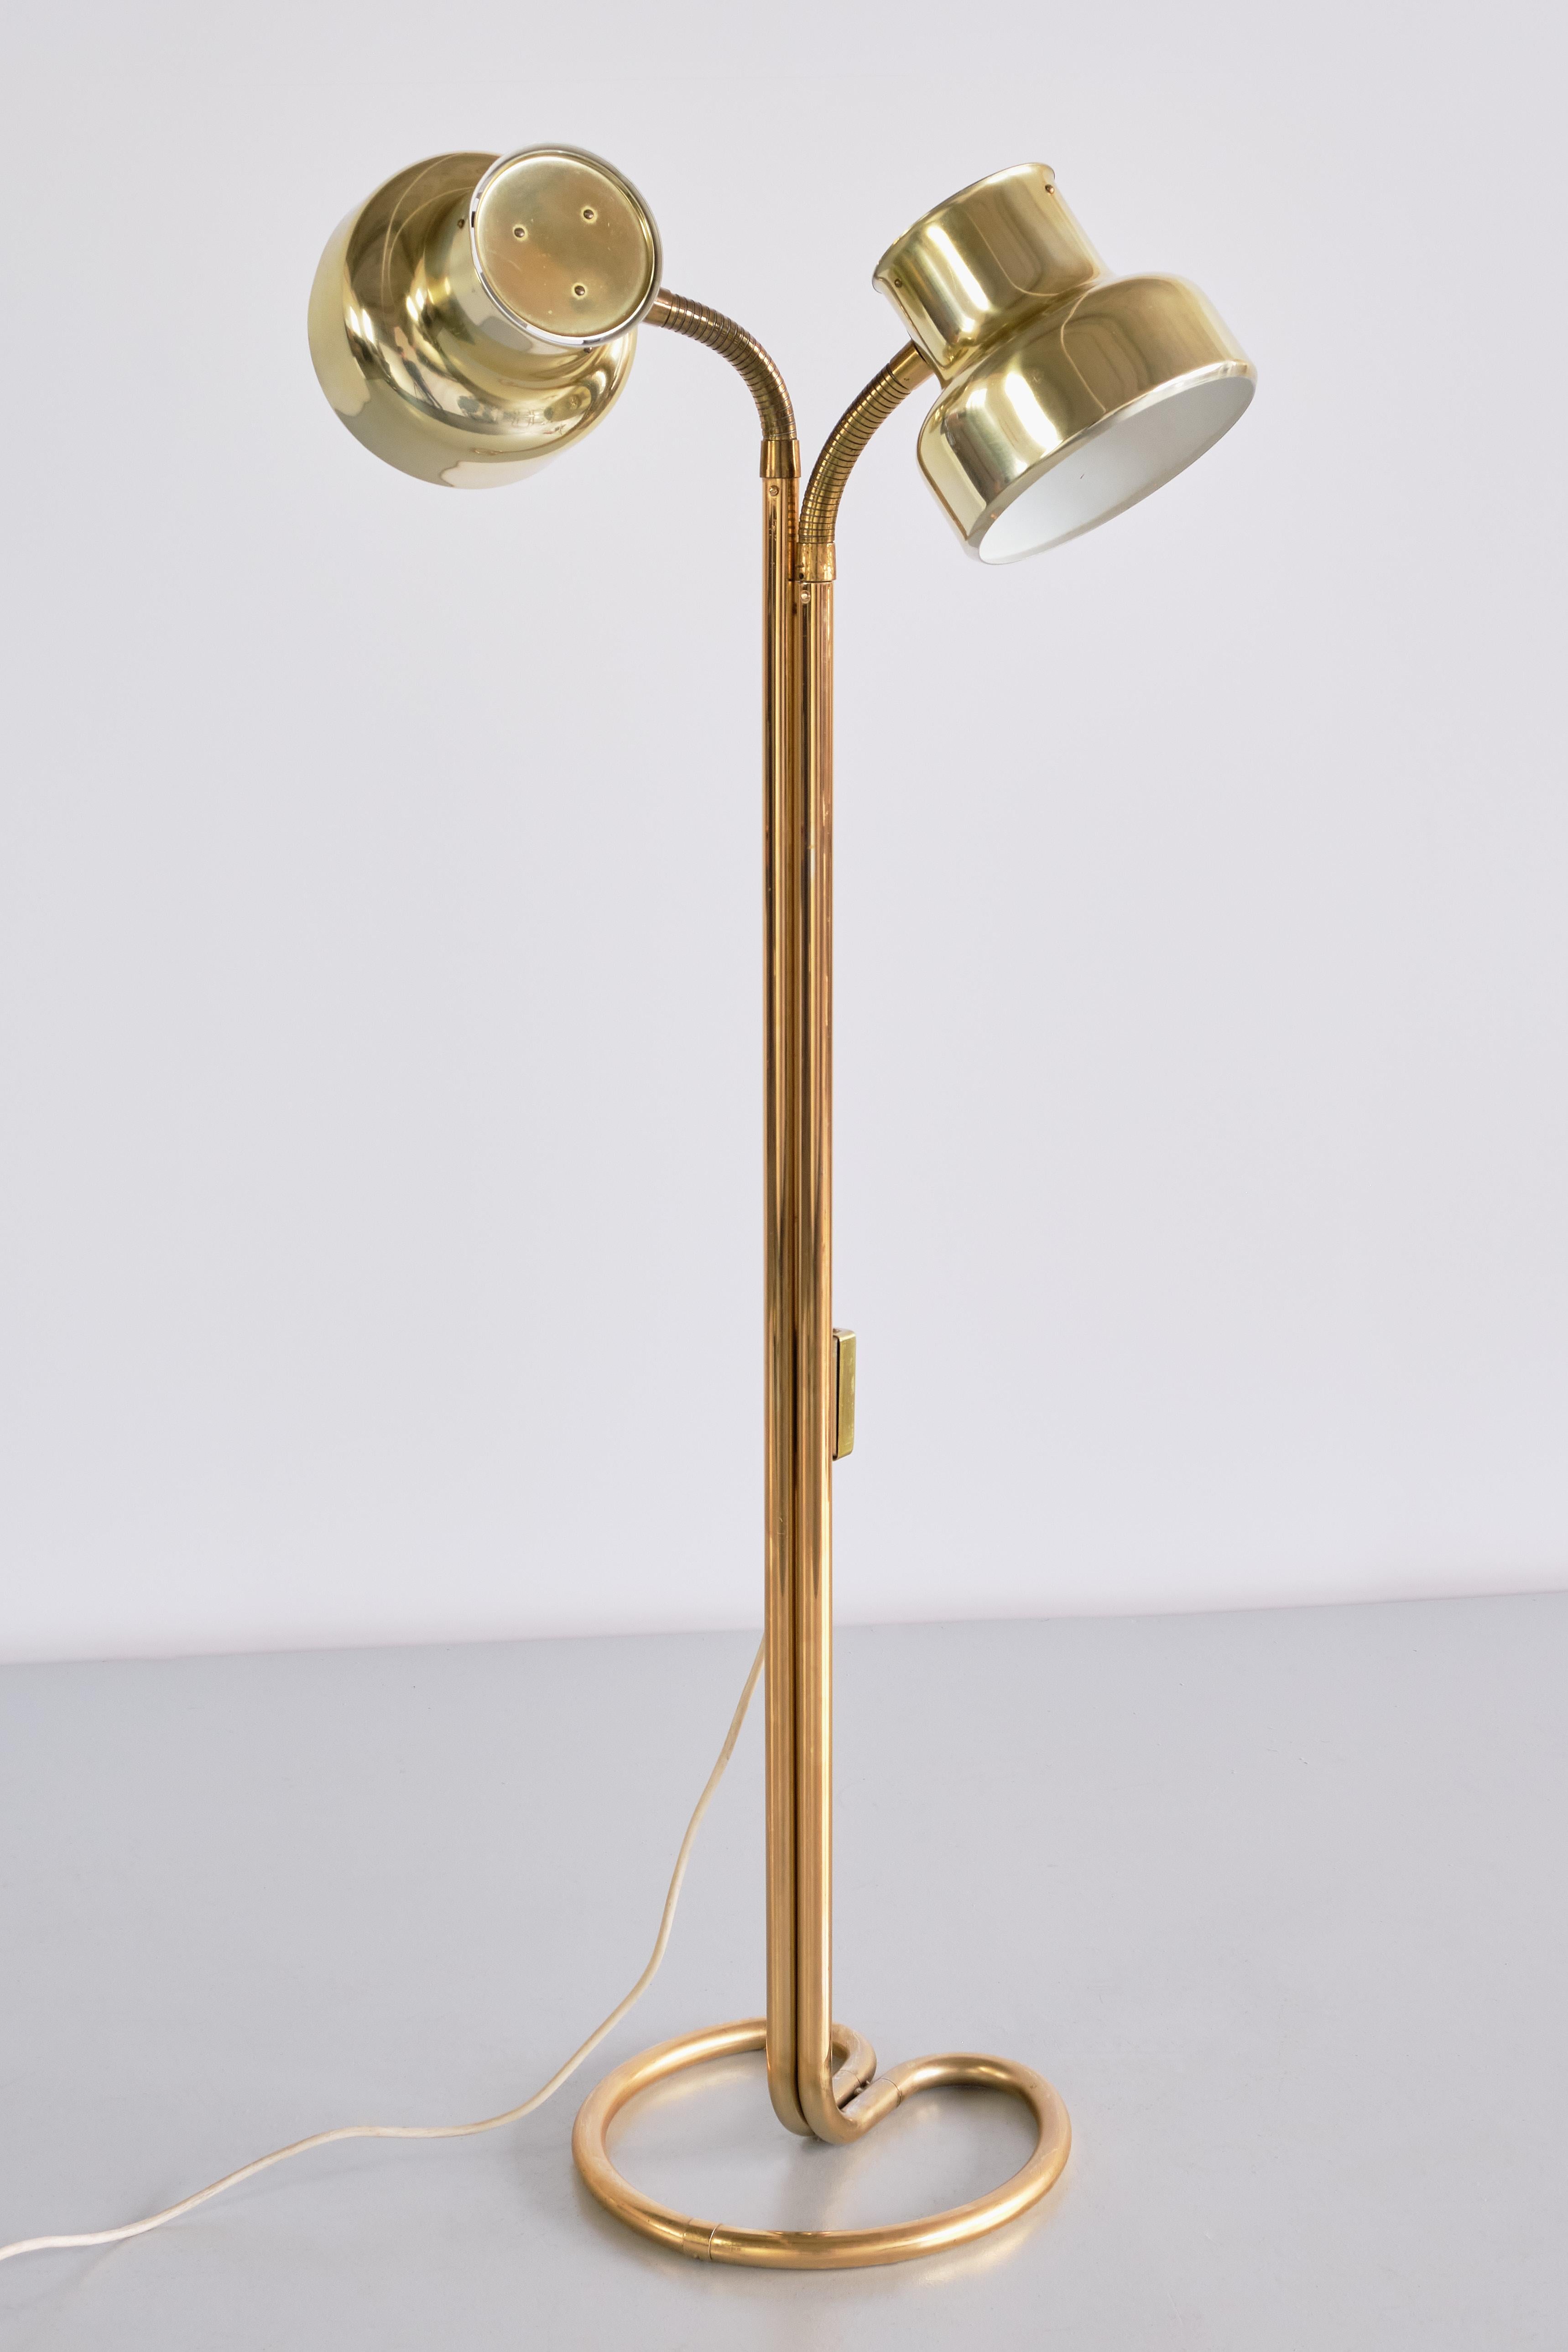 This striking floor lamp was designed by Anders Pehrson, the head of design at Atelje Lyktan in Ahus, Sweden. The model is named Bumling and was produced in 1968. It's part of the Bumling series, consisting of different models but always with the